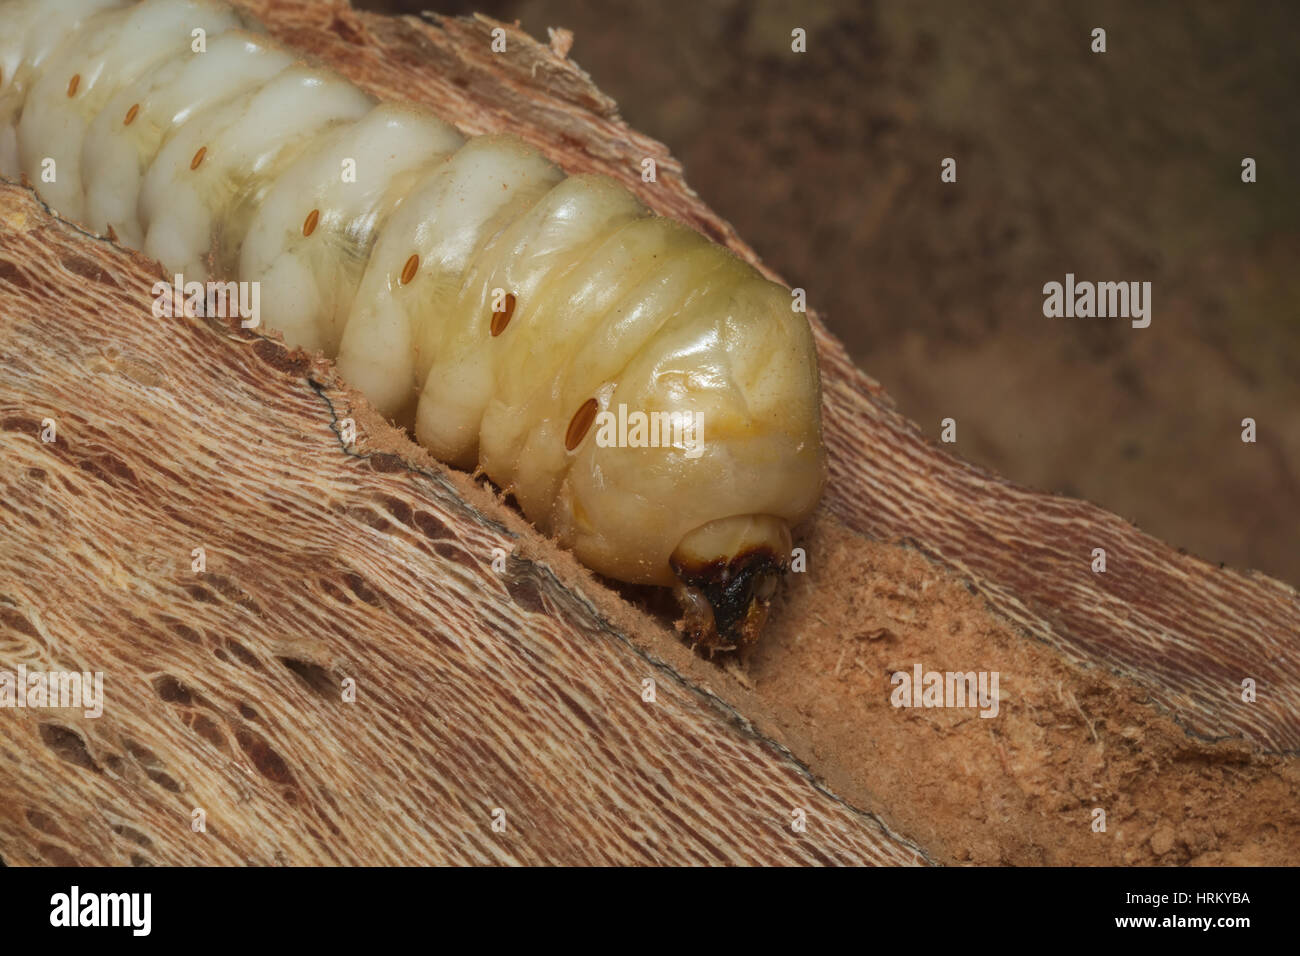 Detail of the head of a larva of  a stag beetle (Lucanus cervus) growing inside dead wood of an old tree Stock Photo